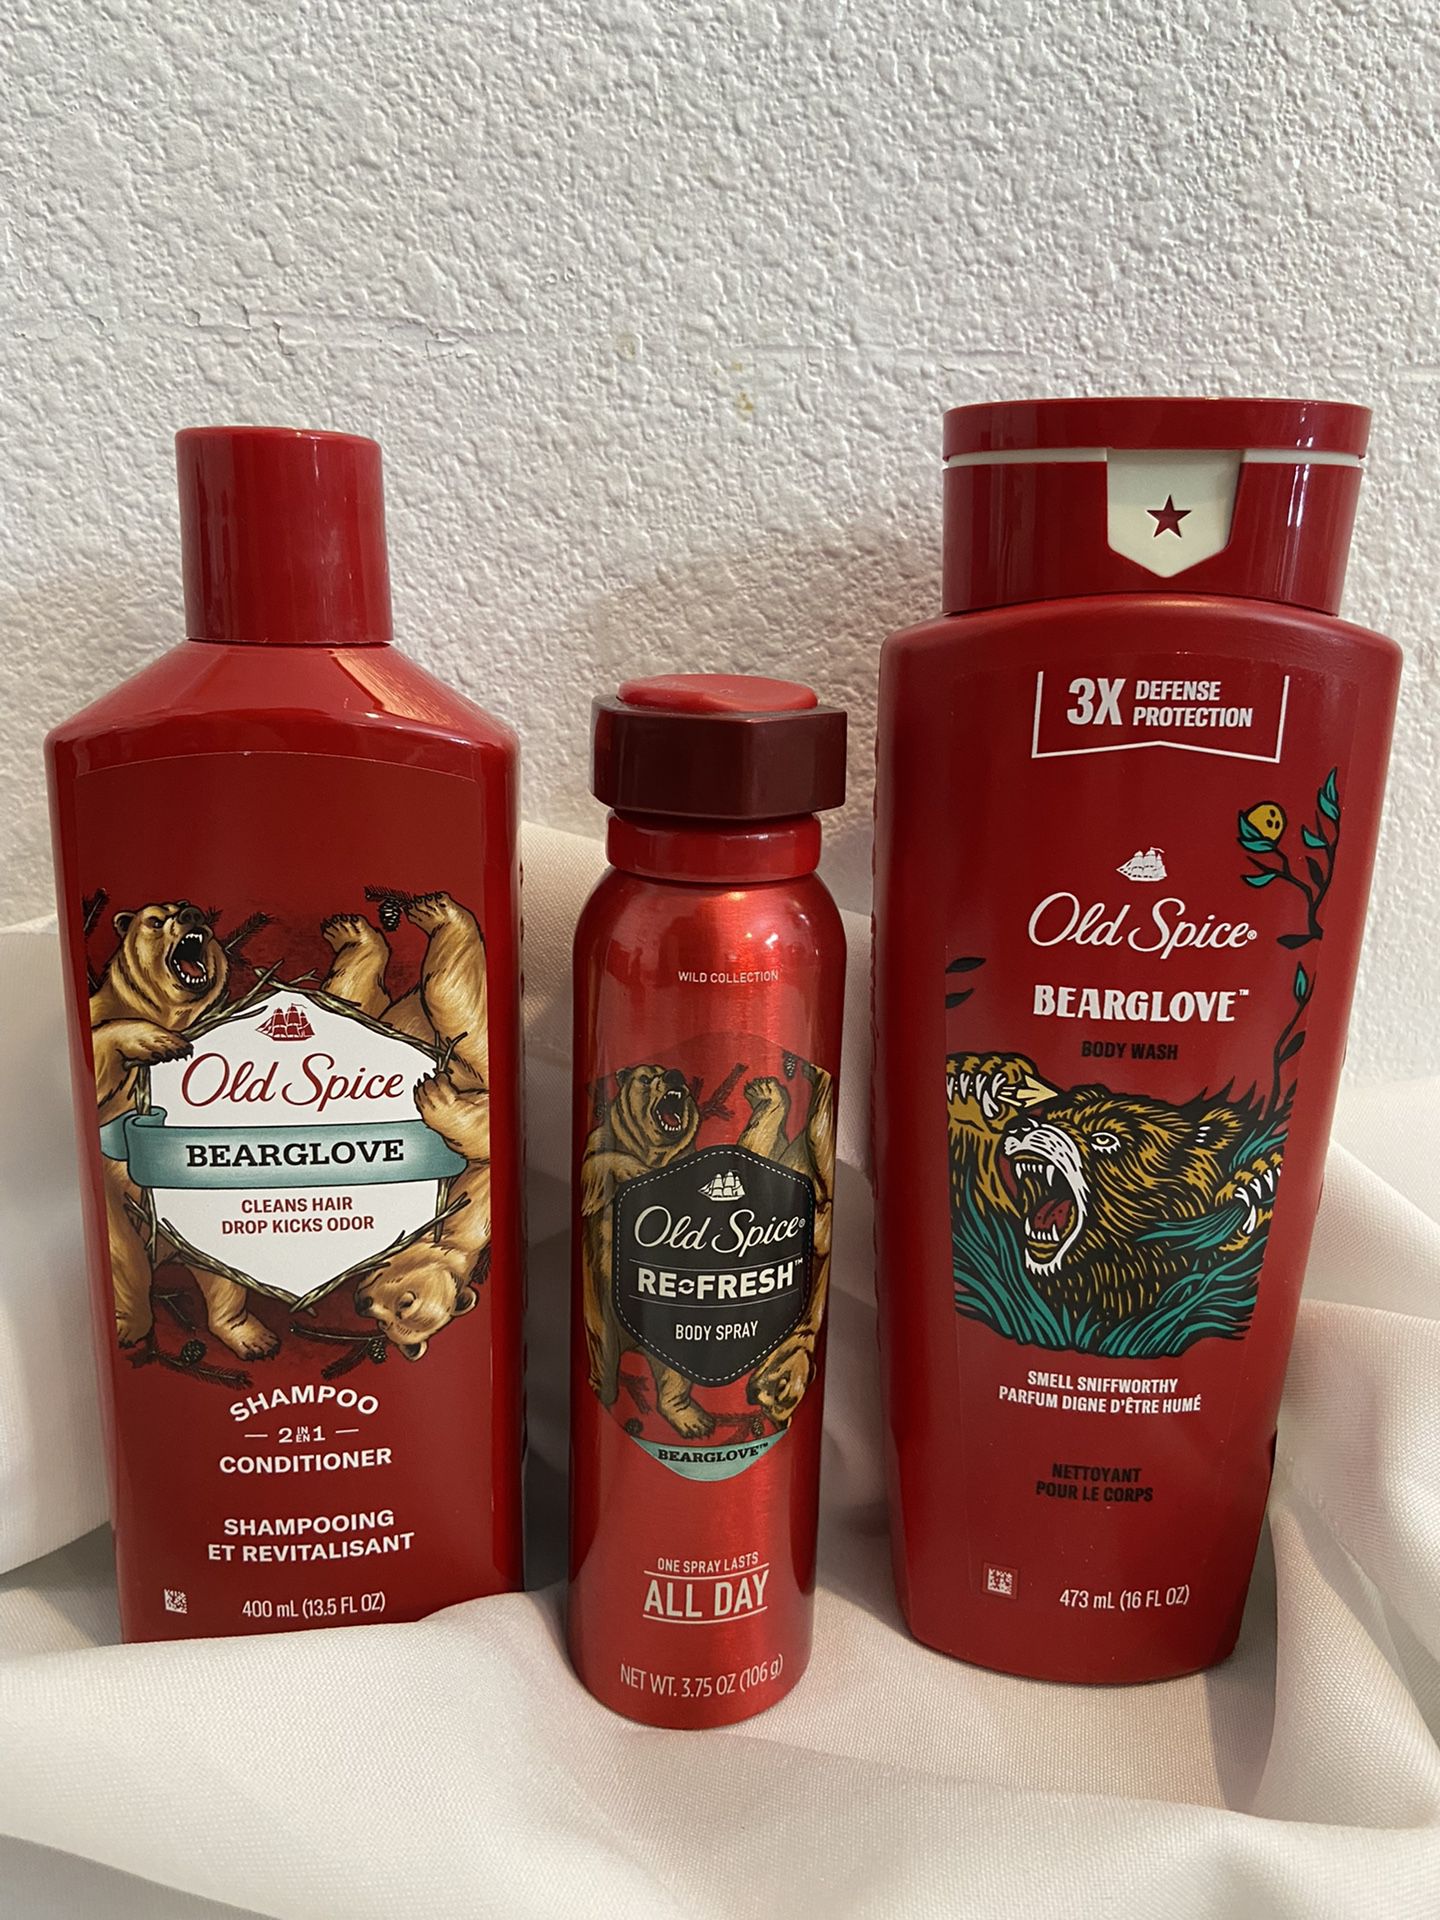 Old Spice body wash+ shampoo and conditioner+ body spray $10 for all 